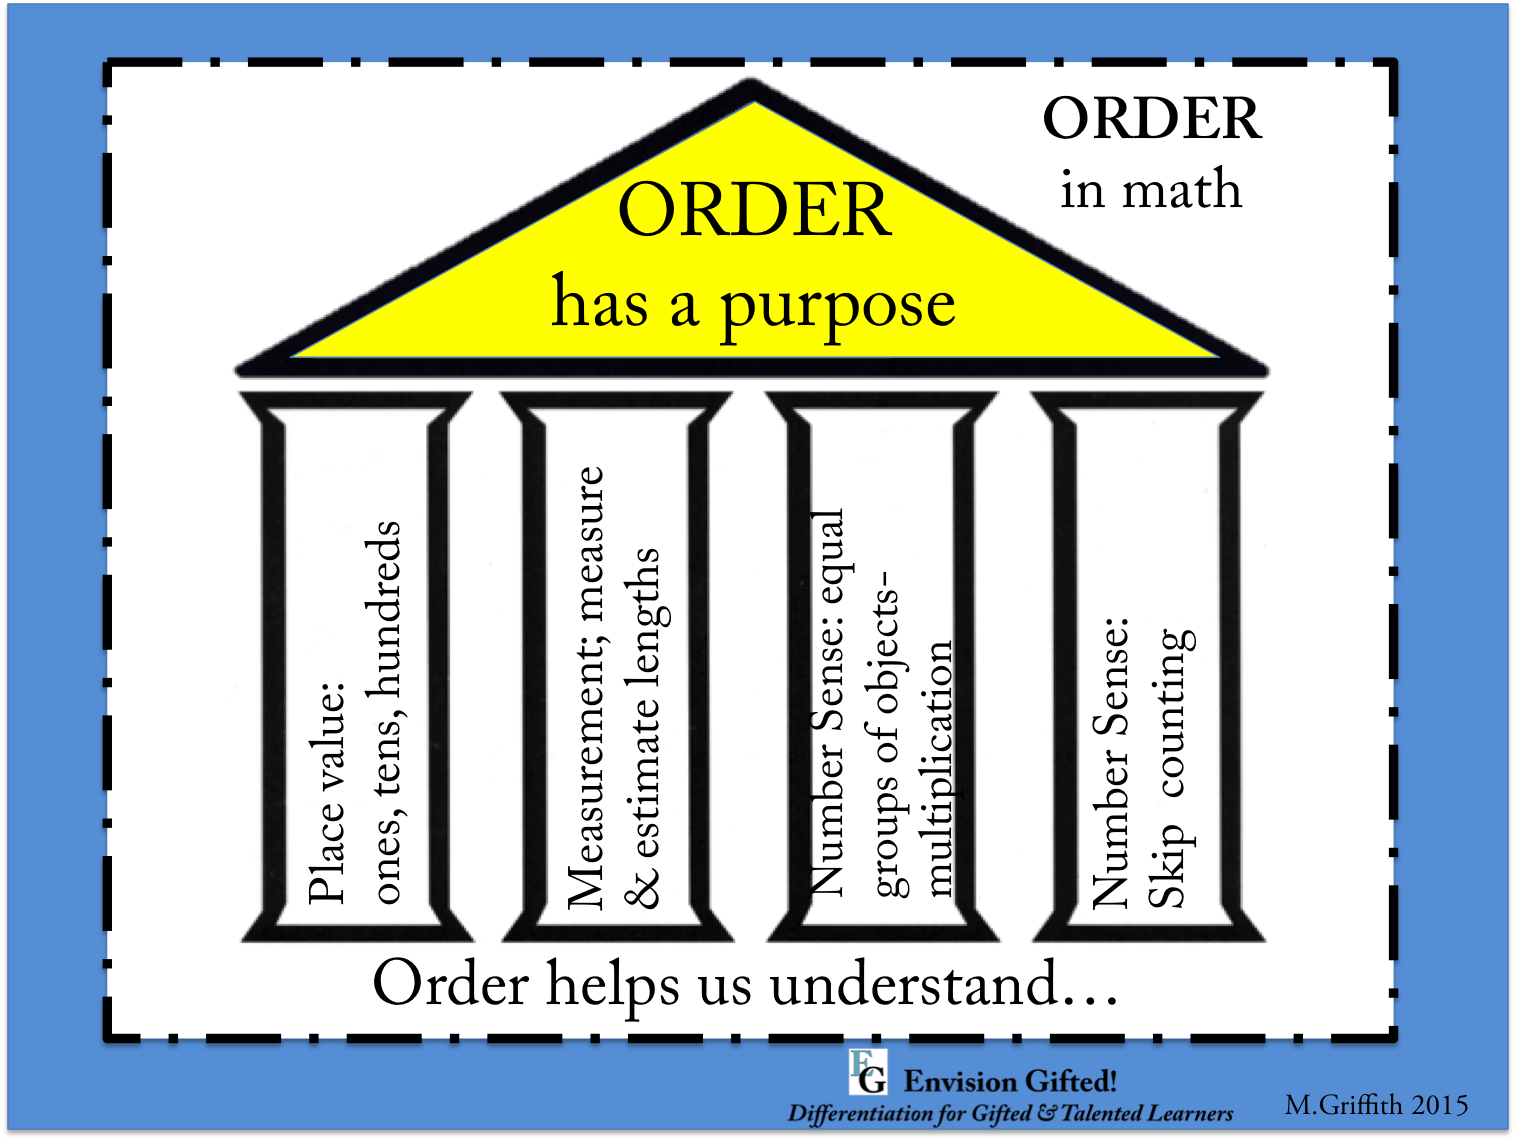 This image shows how one might prove the generalization, "Order has a purpose" "Order helps us understand" mathematics. 